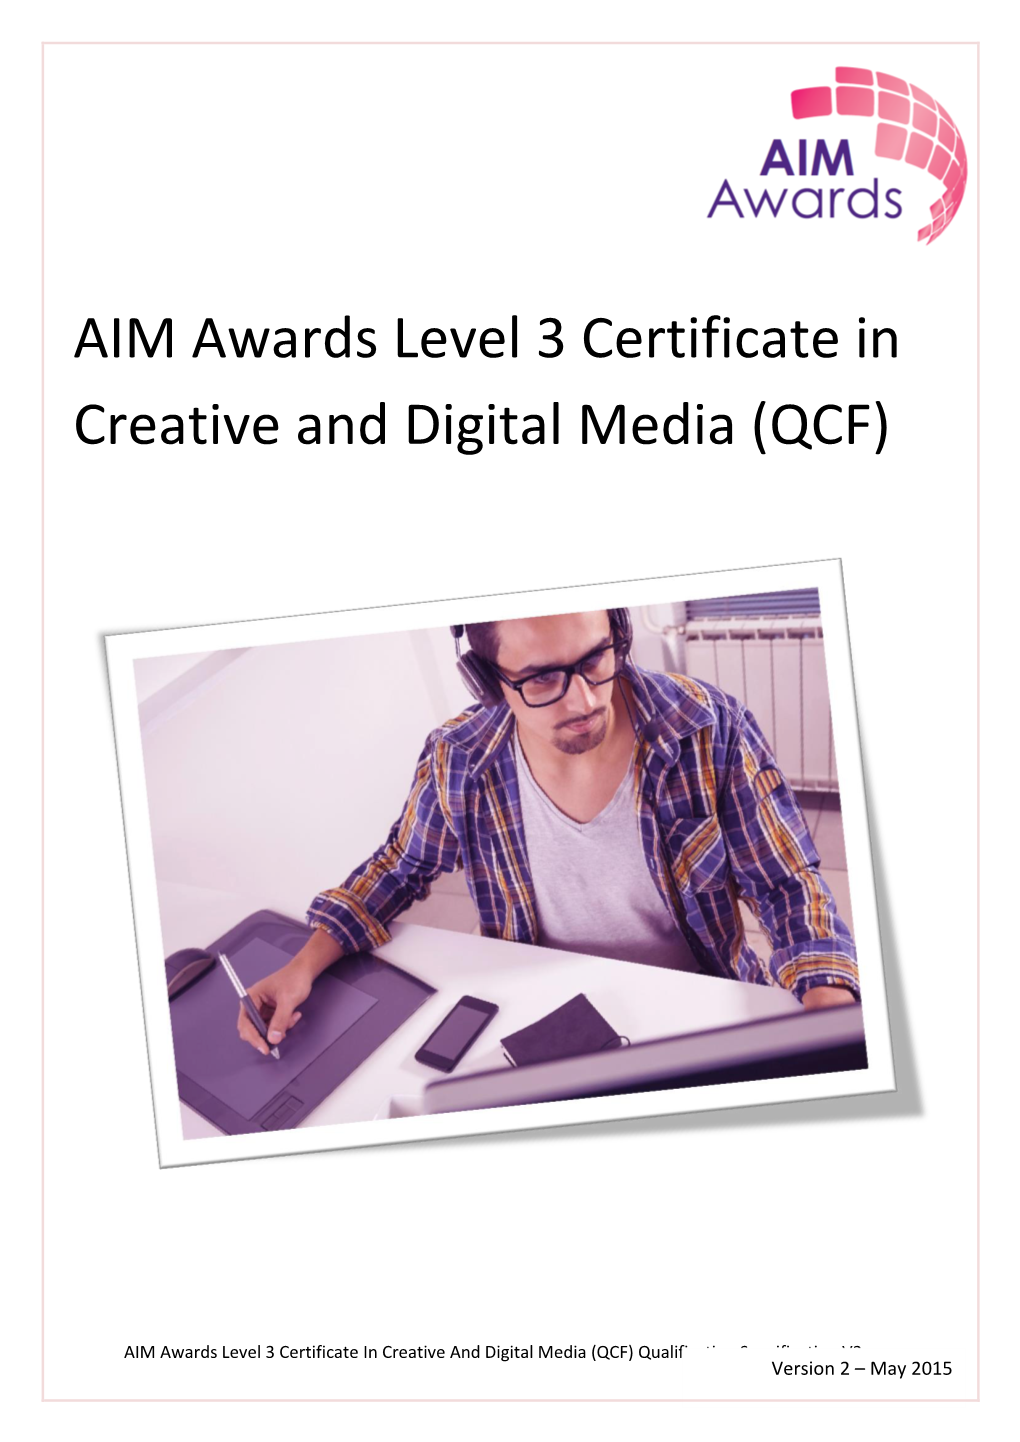 AIM Awards Level 3 Certificate in Creative and Digital Media (QCF) Qualification Specification V2 ©Version AIM Awards 2 – 2014May 2015